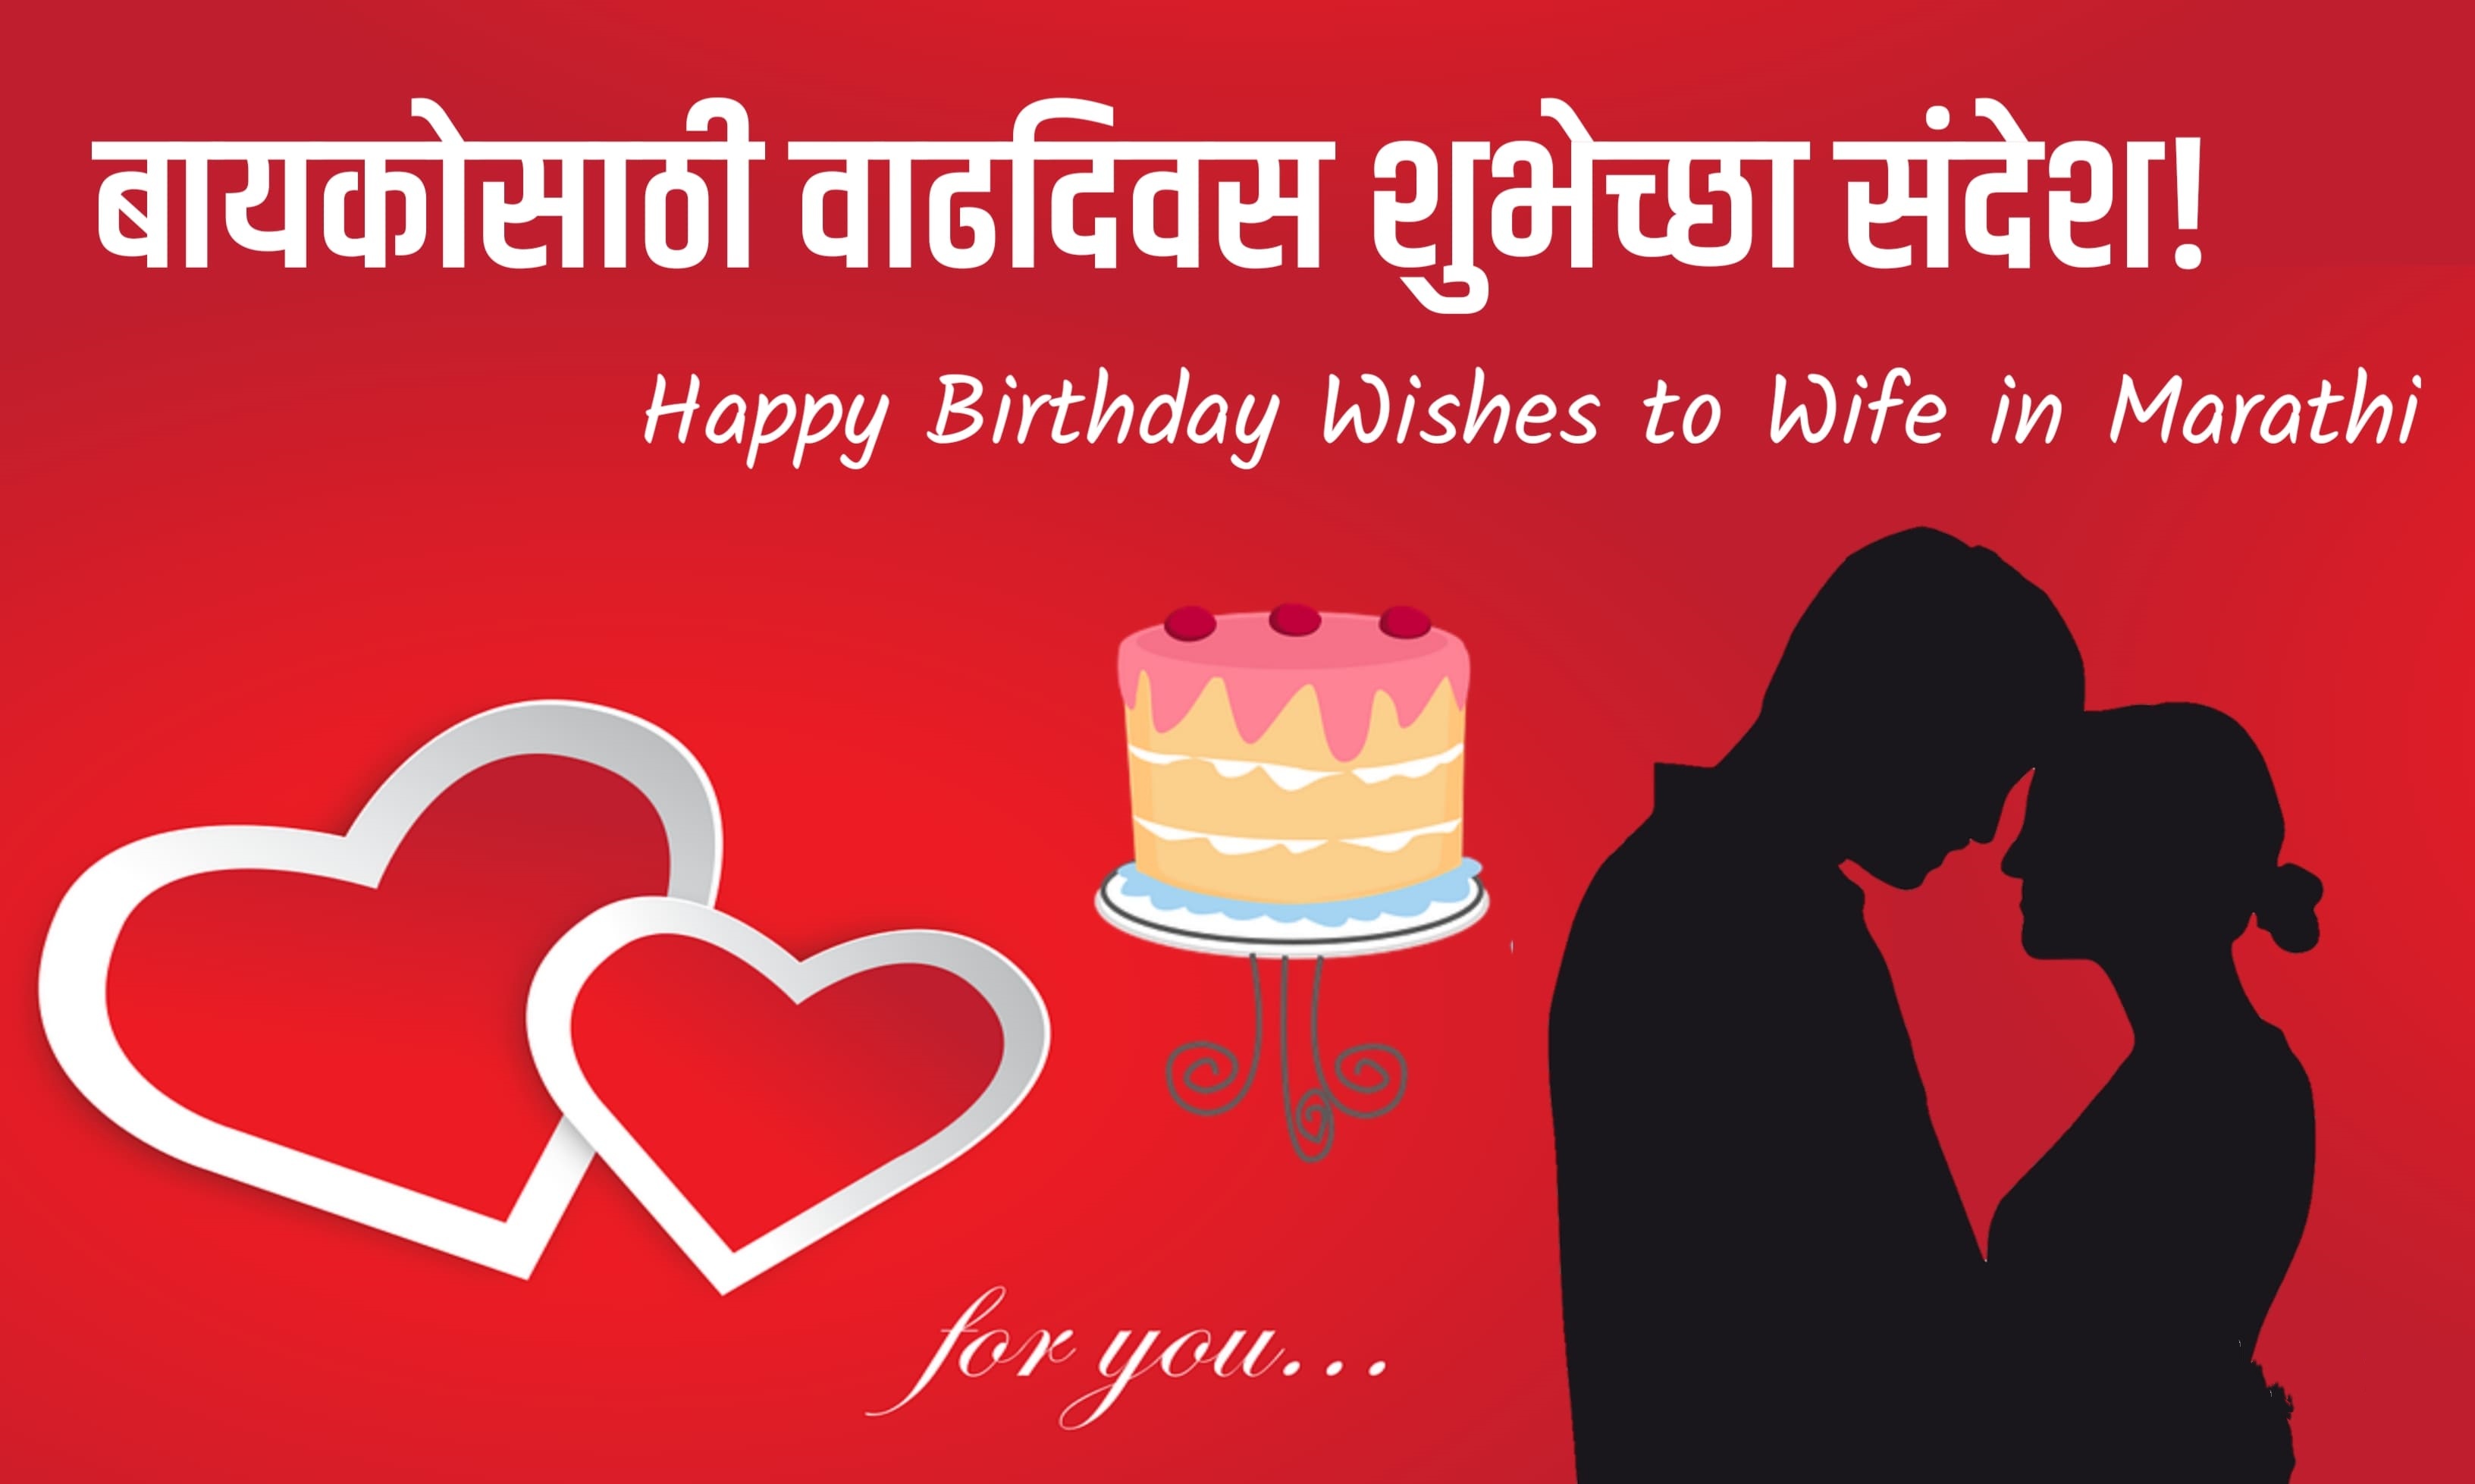 Heart-touching birthday wishes for lover in Marathi